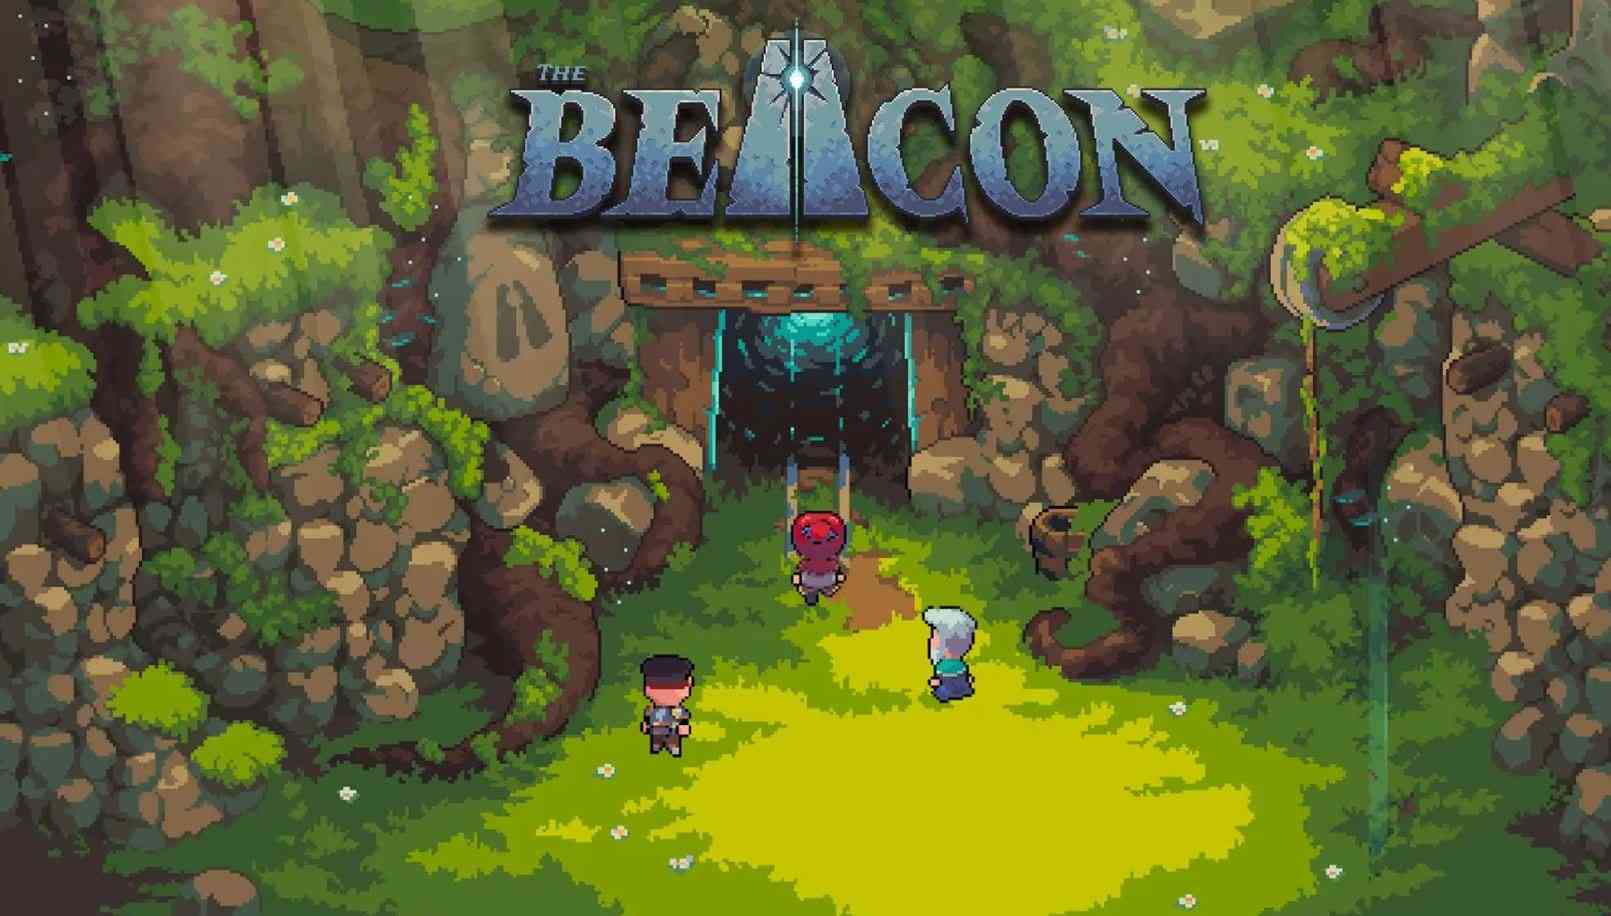 The Beacon - Game Review